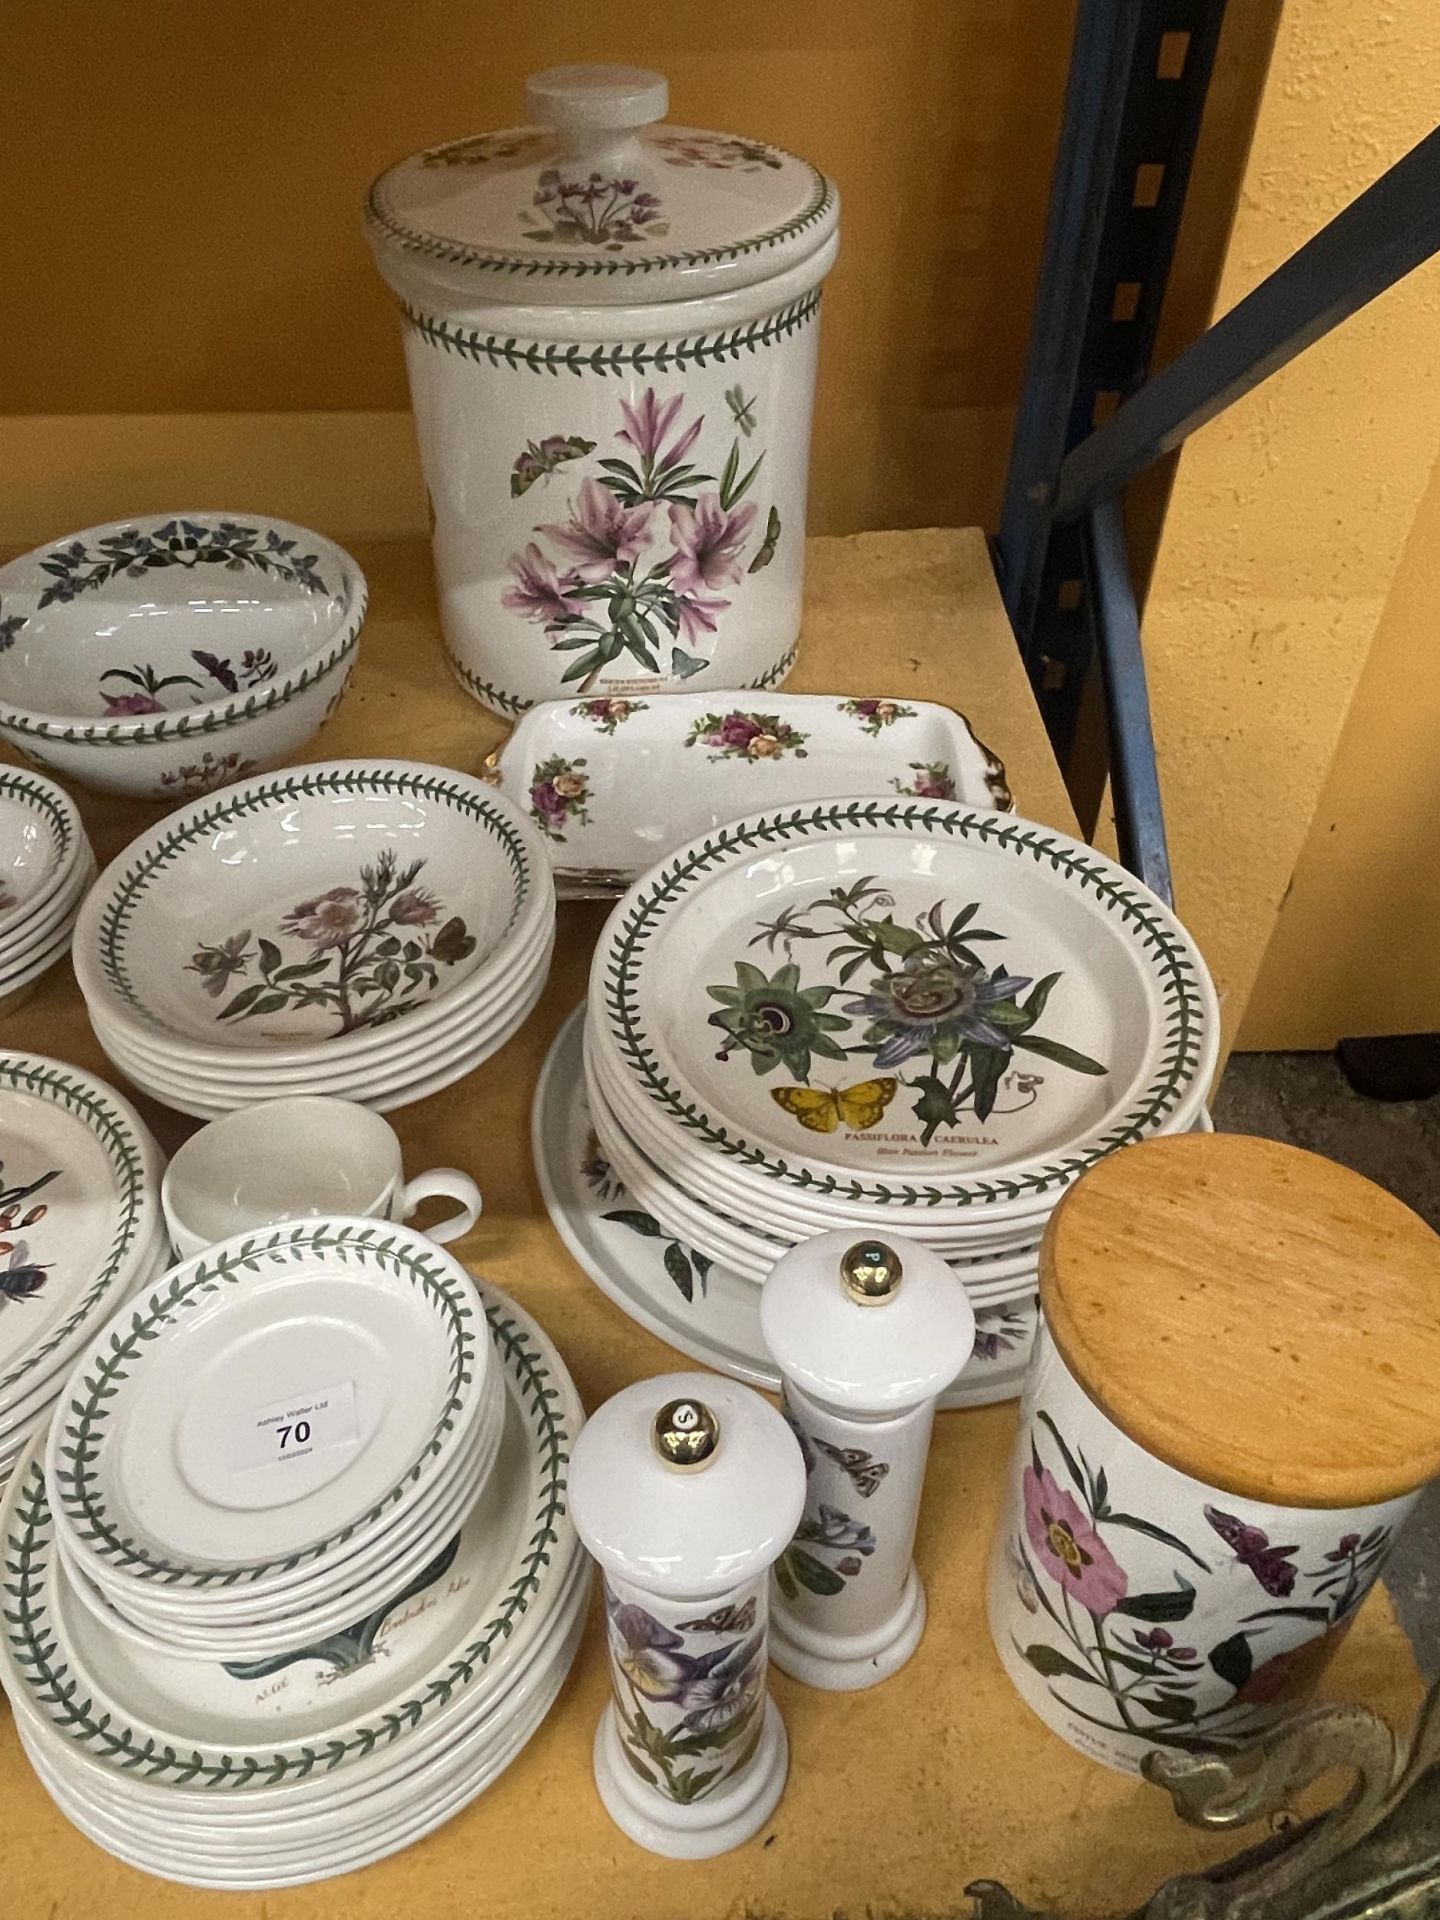 A VERY LARGE QUANTITY OF PORTMEIRION POTTERY TO INCLUDE LIDDED BREAD BIN, BOWLS, PLATES, DISHES, - Image 5 of 5